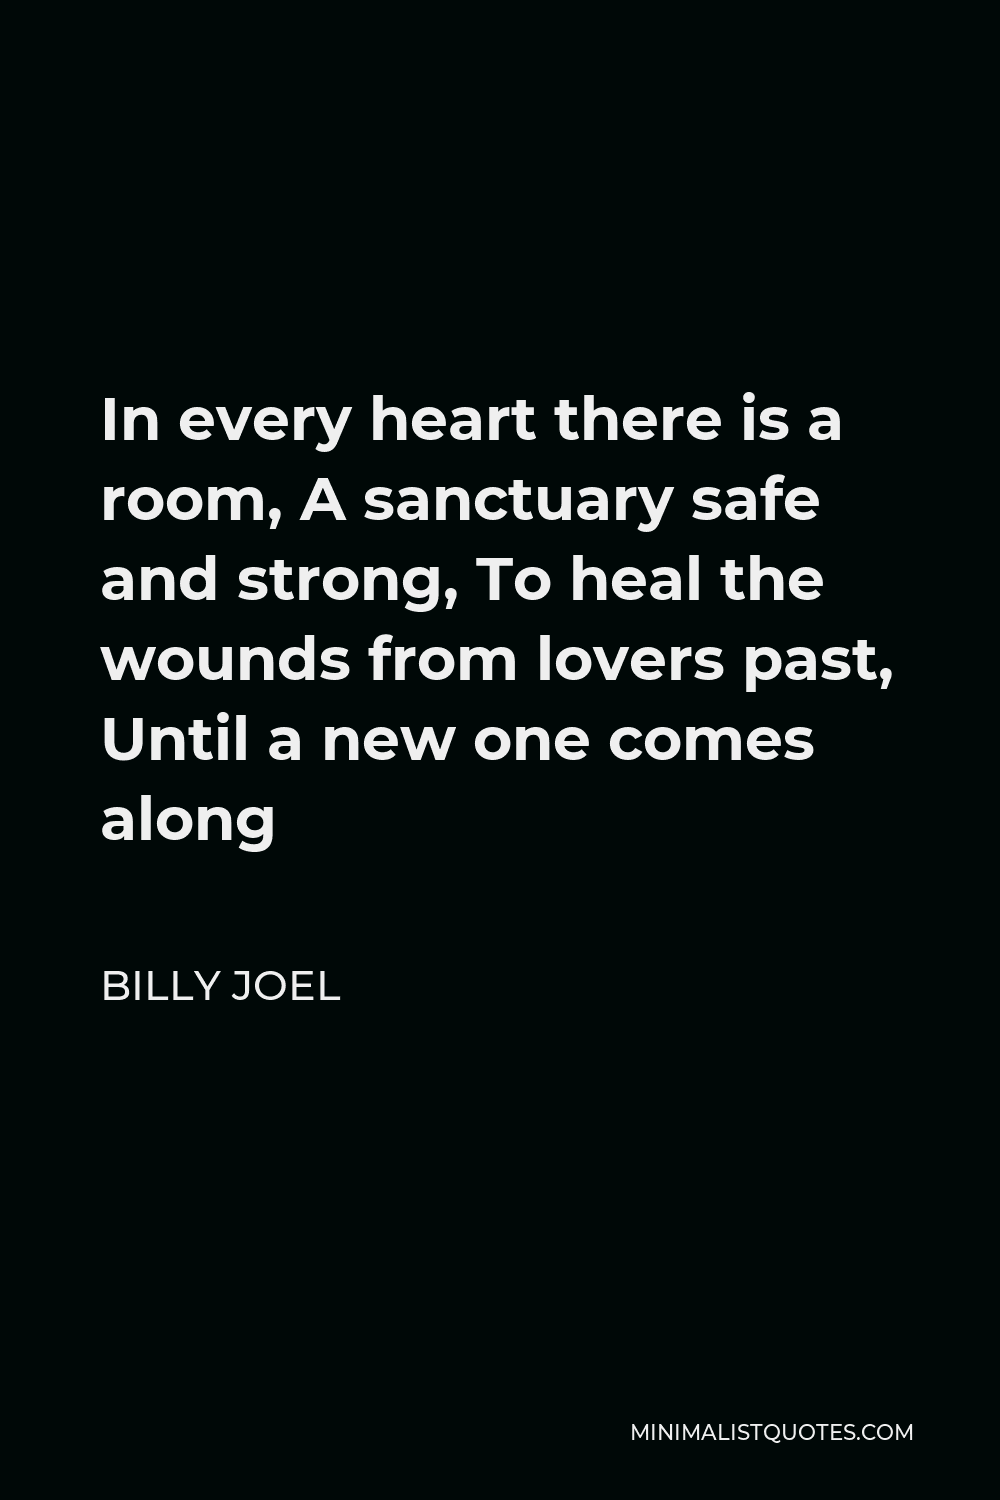 Billy Joel Quote - In every heart there is a room, A sanctuary safe and strong, To heal the wounds from lovers past, Until a new one comes along